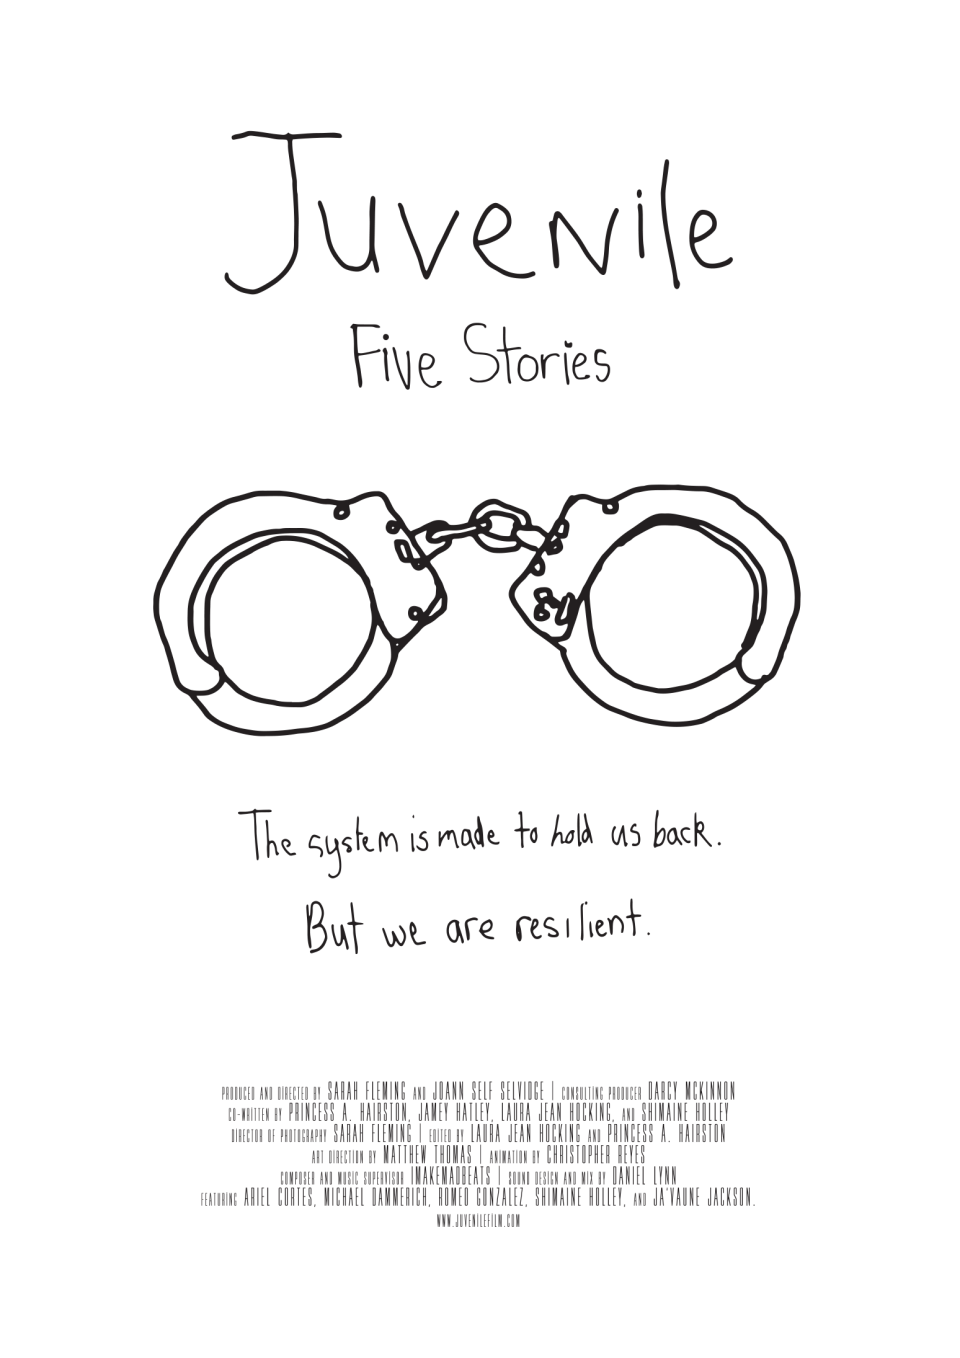 In hand-written text, the title "Juvenile: Five Stories" floats above a simple, line-drawn pair of handcuffs. Below are the words: "This system is made to hold us back. But we are resilient."